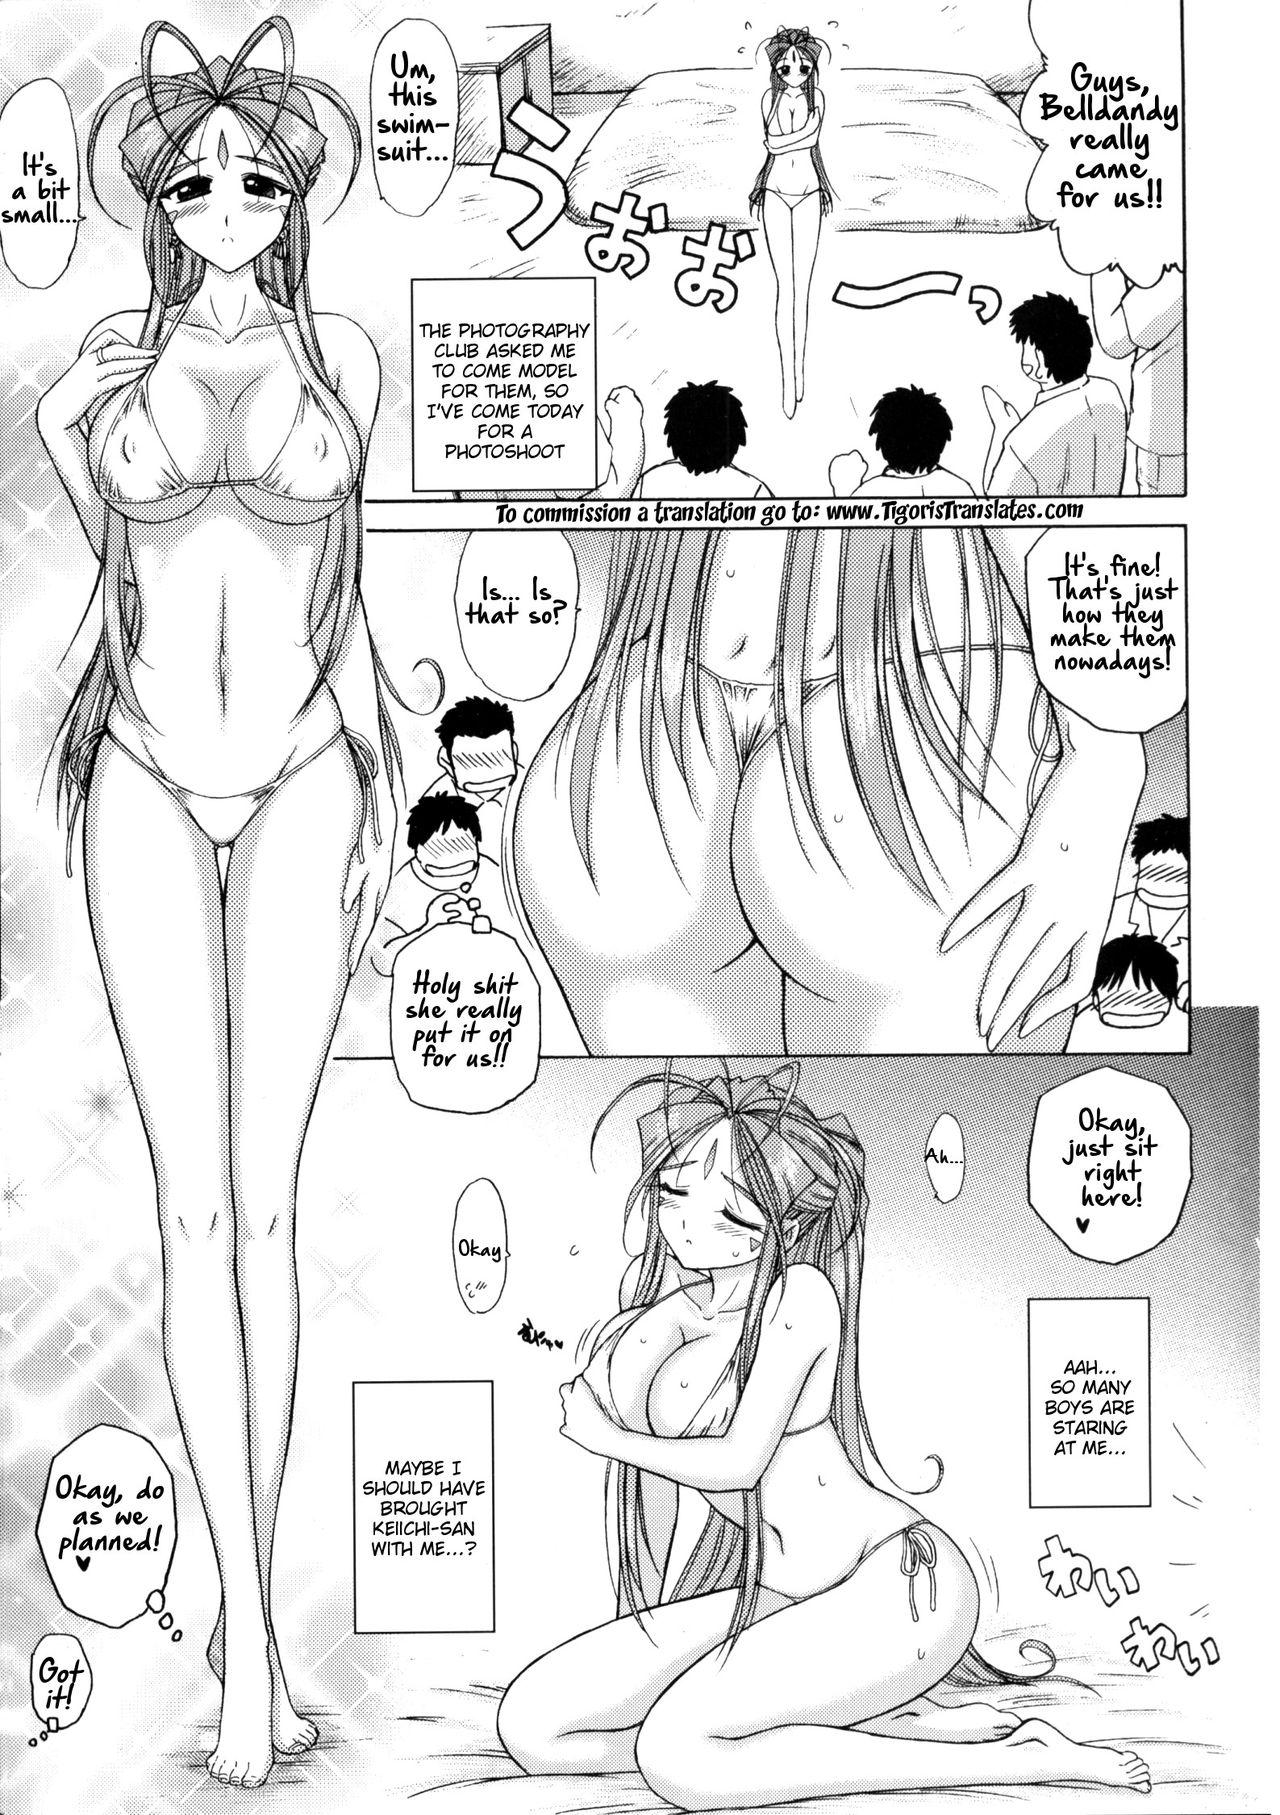 Porn Blow Jobs Submission Sailormoon After/Midgard - Sailor moon Ah my goddess Male - Page 12